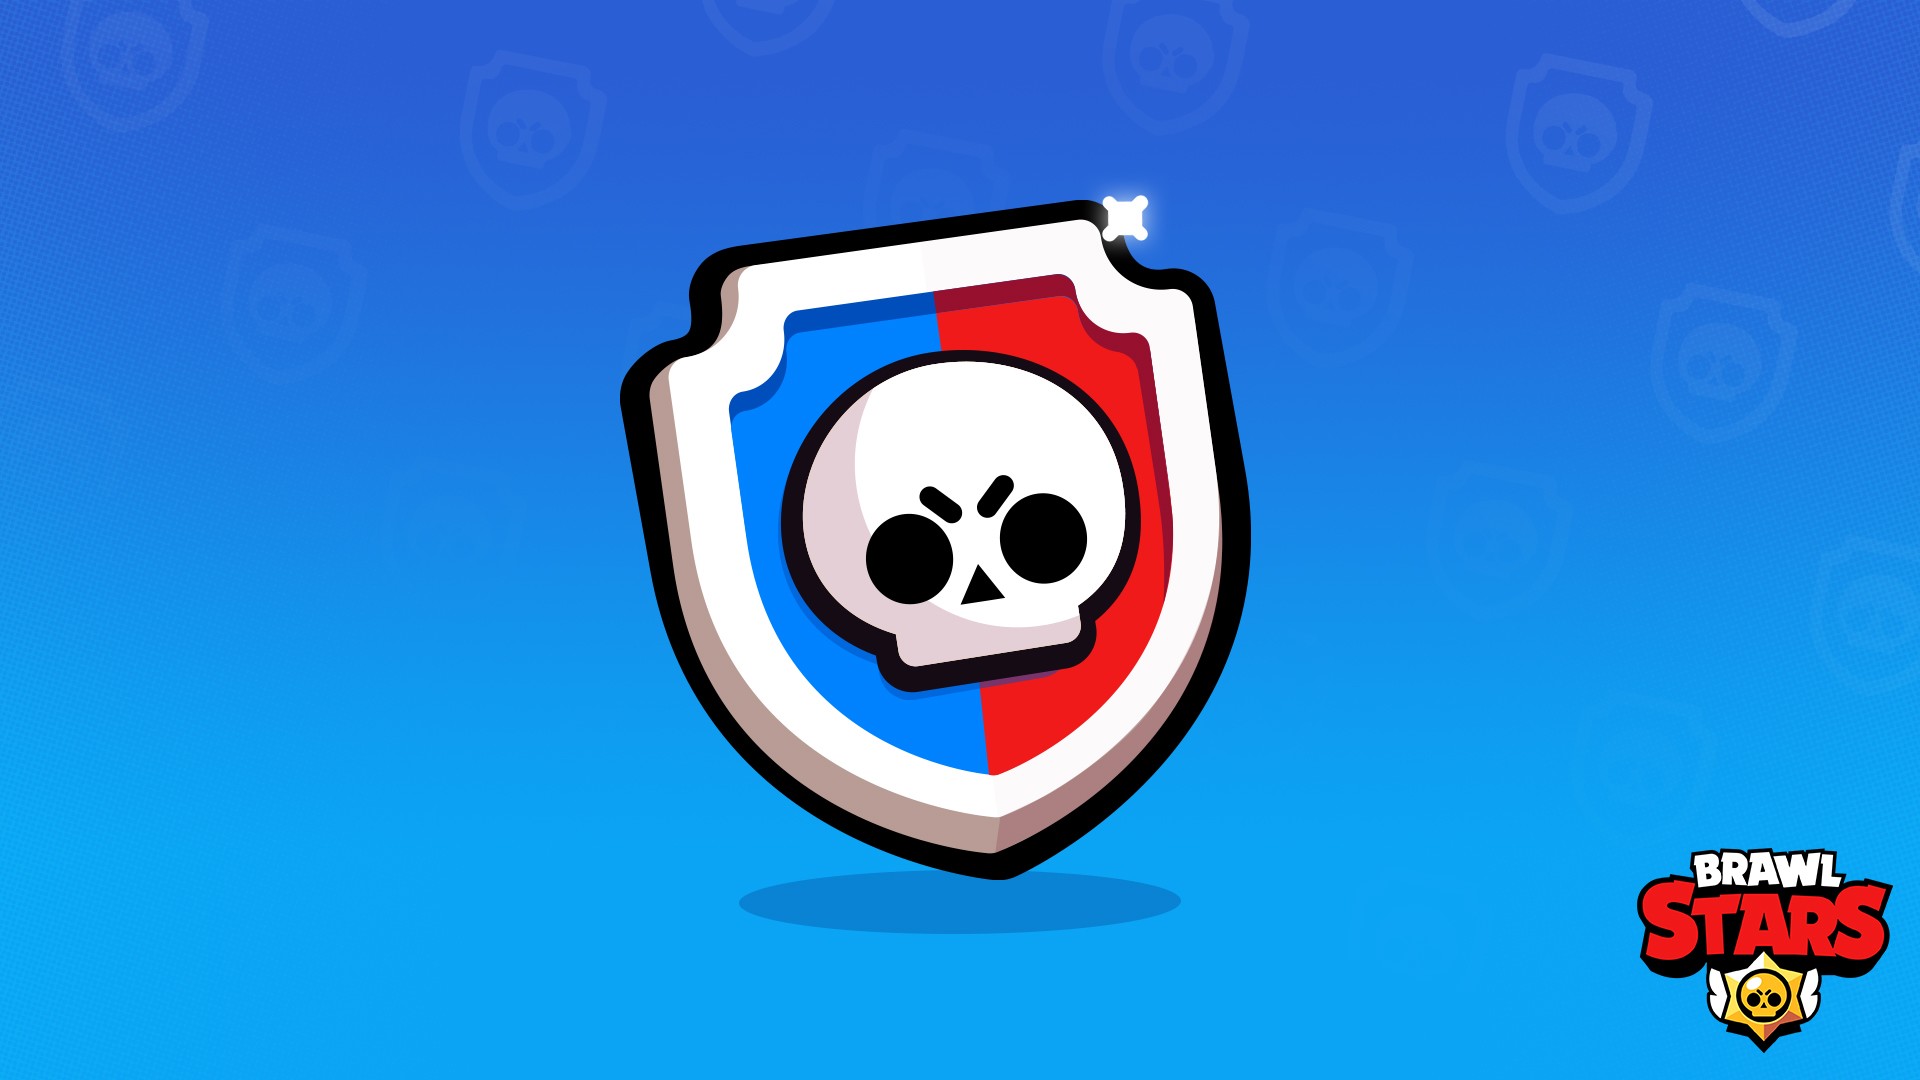 What You Need To Know About The Power League In Brawl Stars Dot Esports - image brawl stars profil maxou 48 48